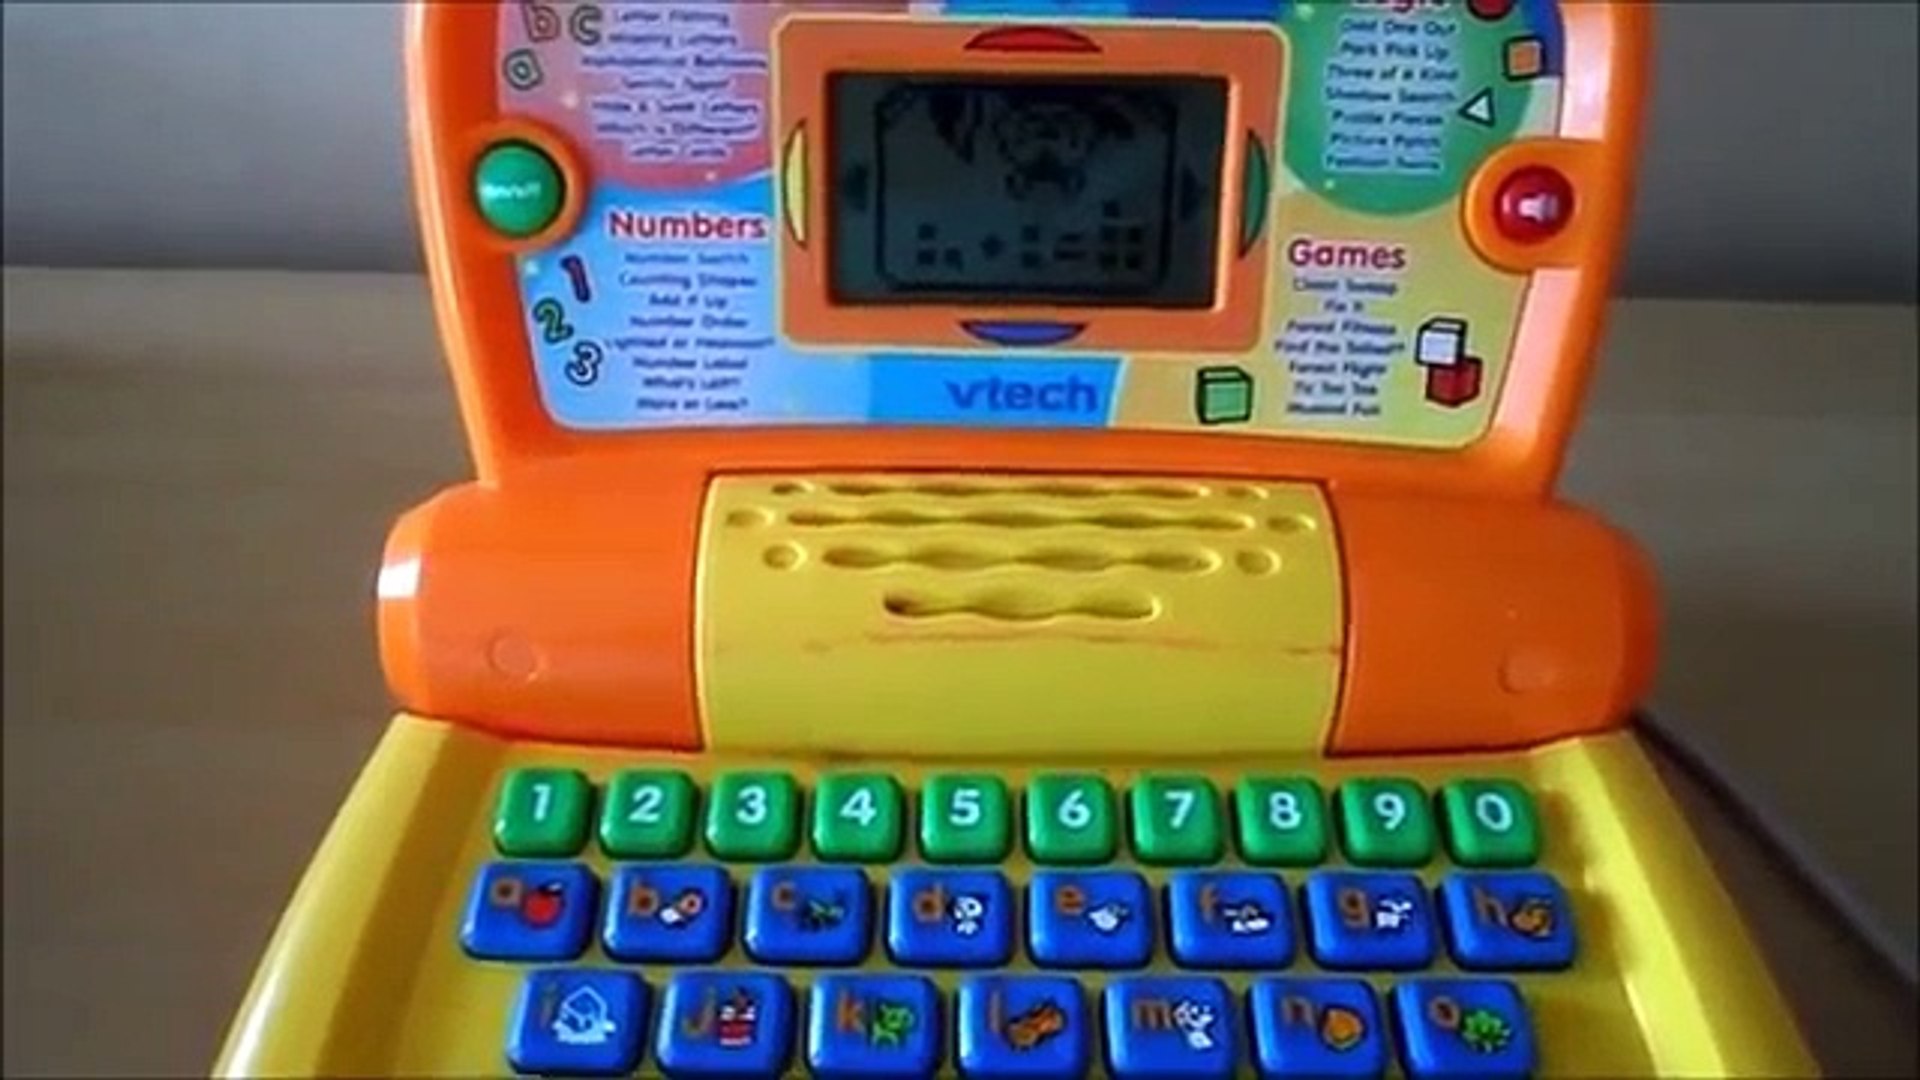 VTech Tote N' Go Laptop with Mouse (3-6 Years) Review - video Dailymotion